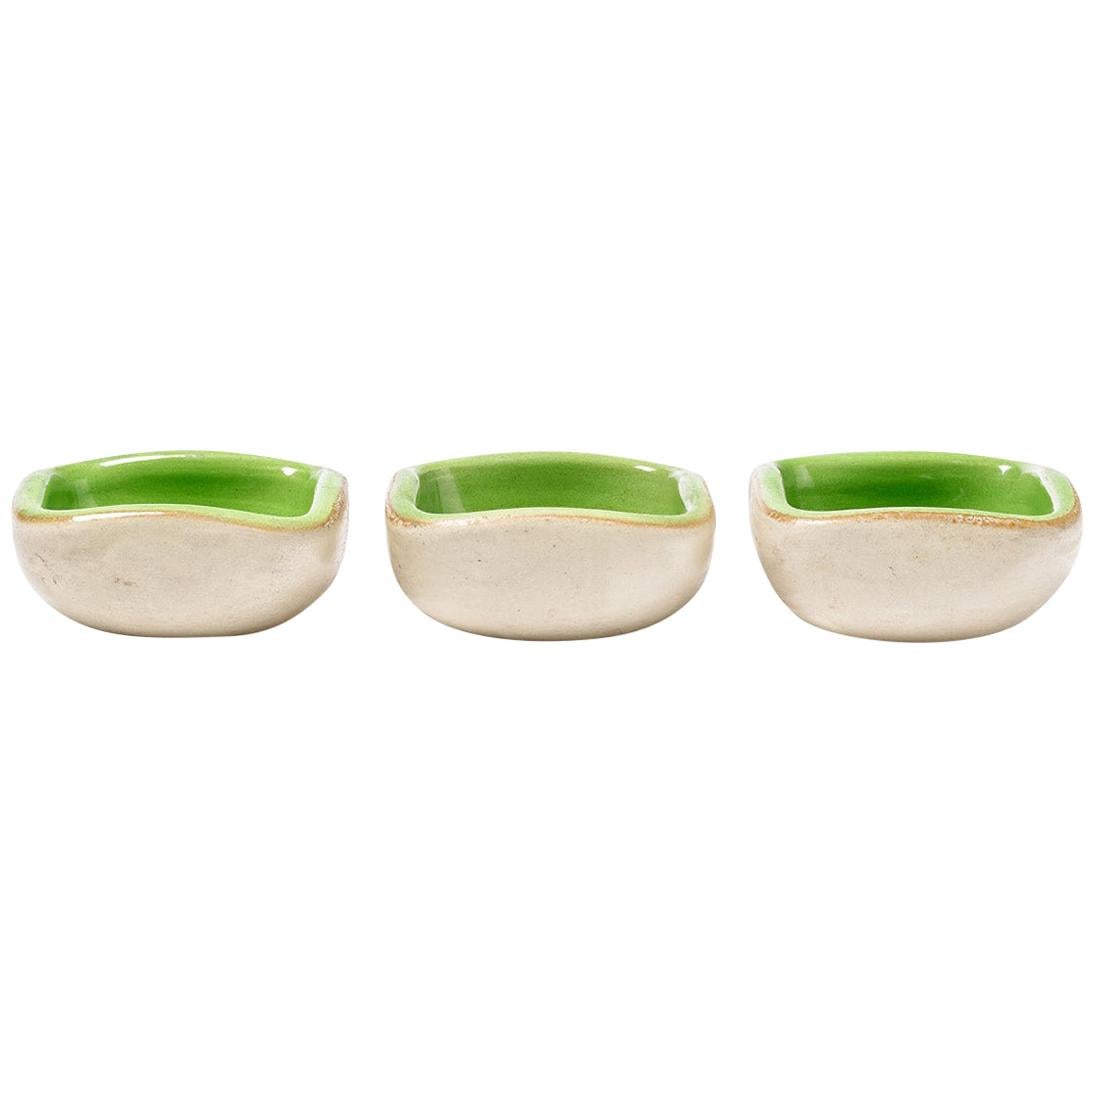 Set of Three Ceramic Green and White Dishes Cup by Keramos Midcentury Design